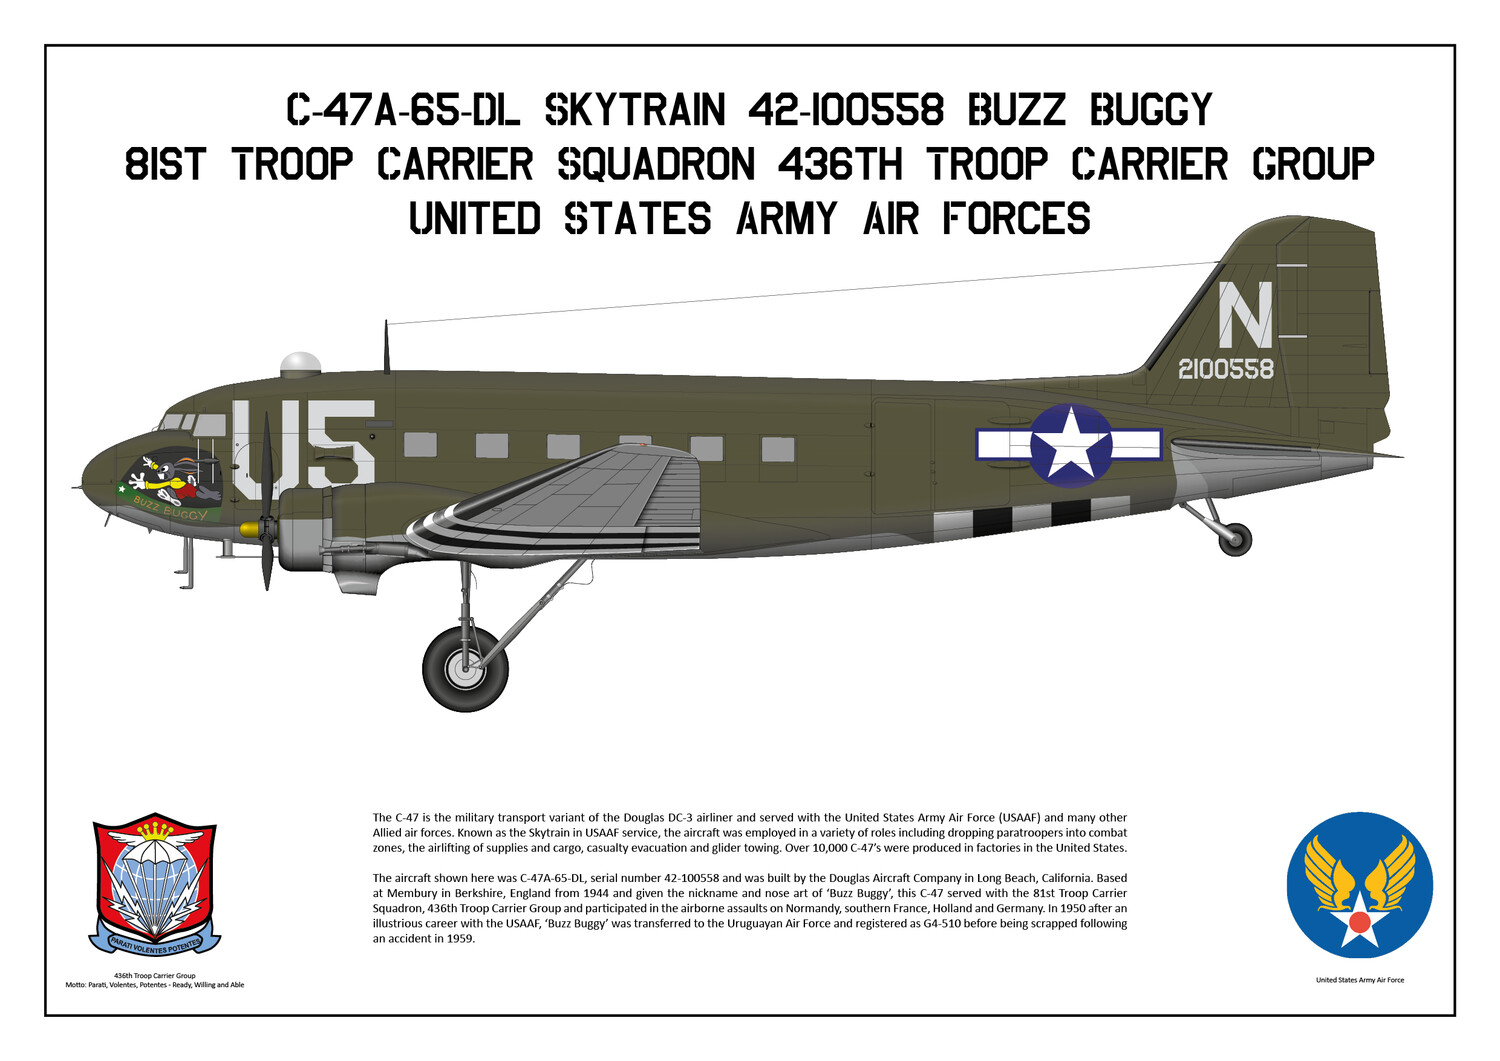 C-47 Skytrain 42-100558 Buzz Buggy of the 81st Troop Carrier Squadron - Layout A